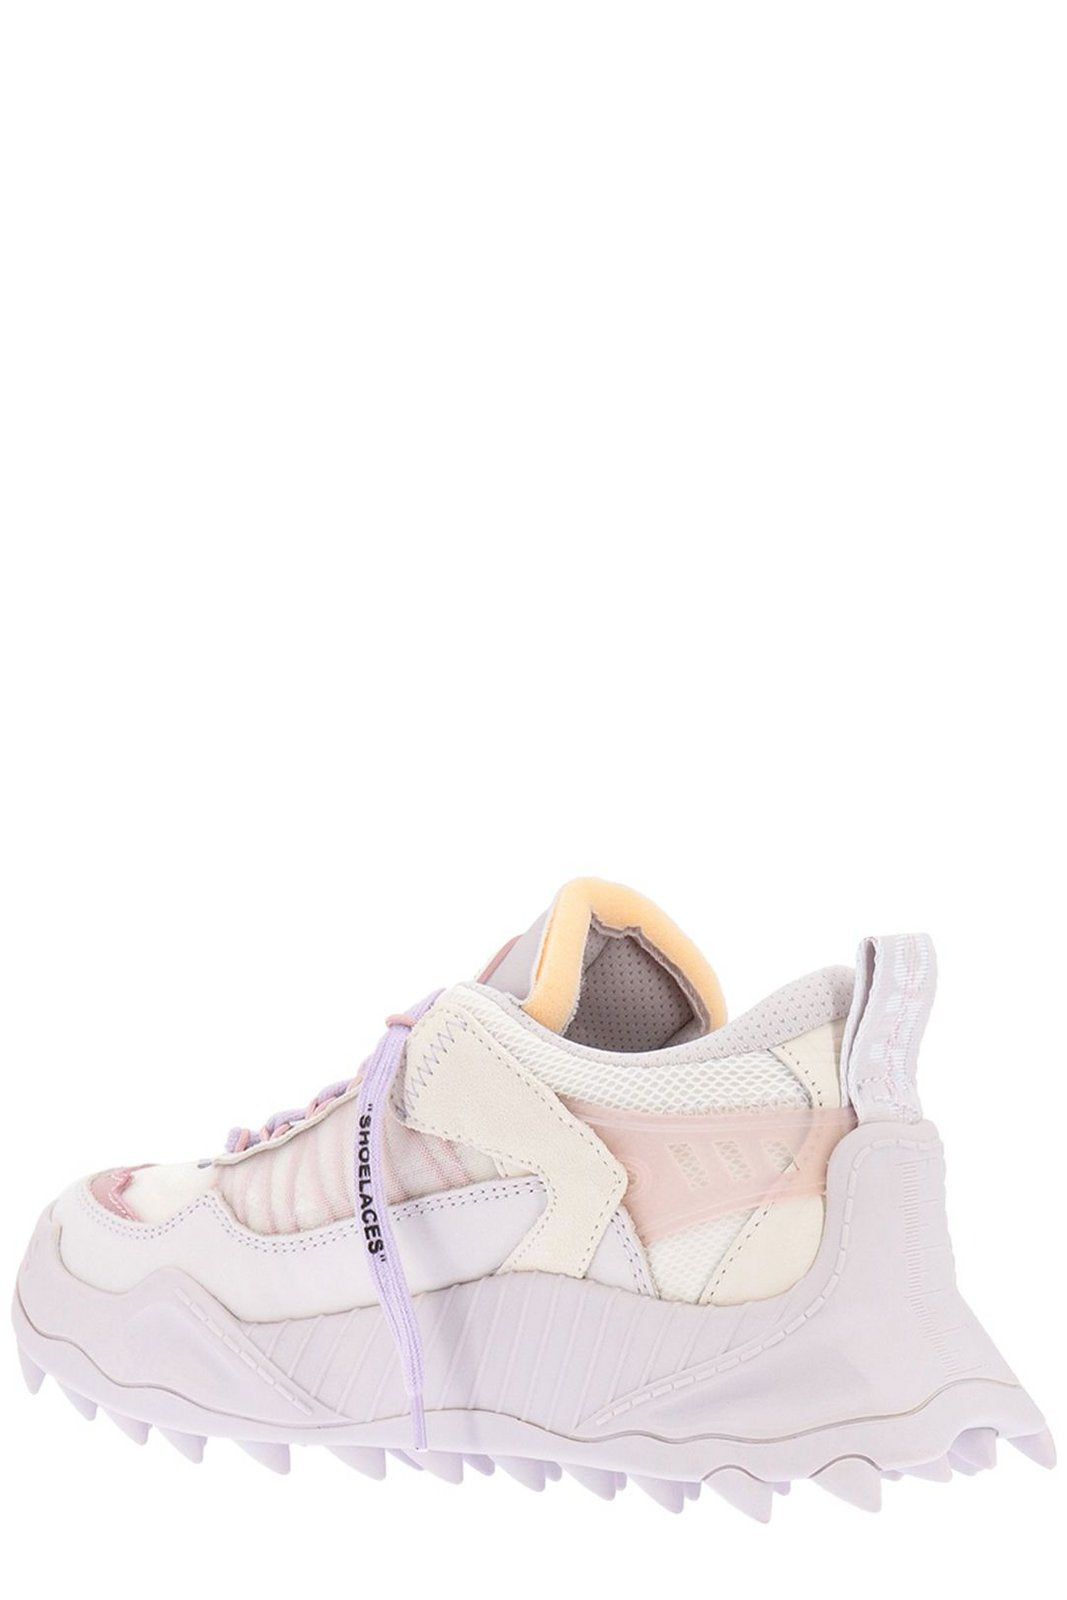 Off-White Odsy Logo Detailed Low-Top Sneakers